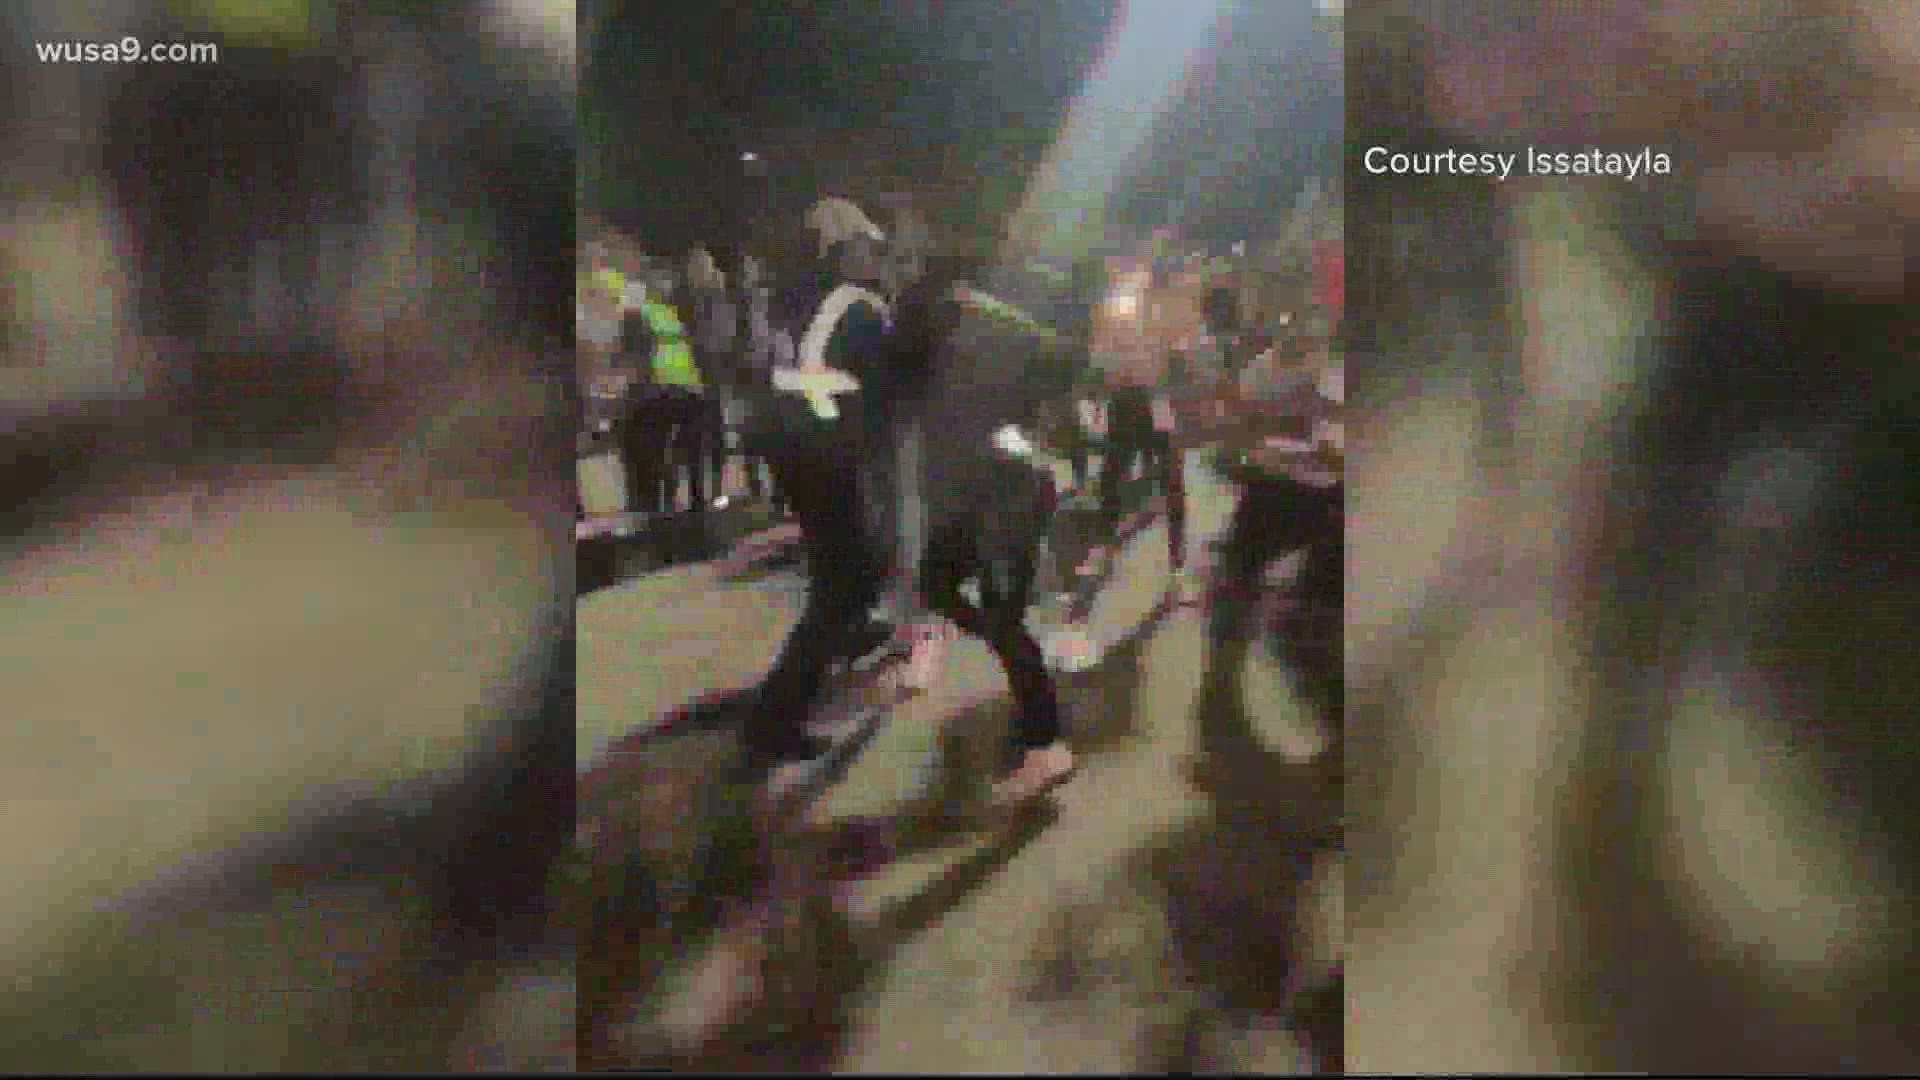 Watch: Several fights break out at Six Flags in Maryland prompting early closure